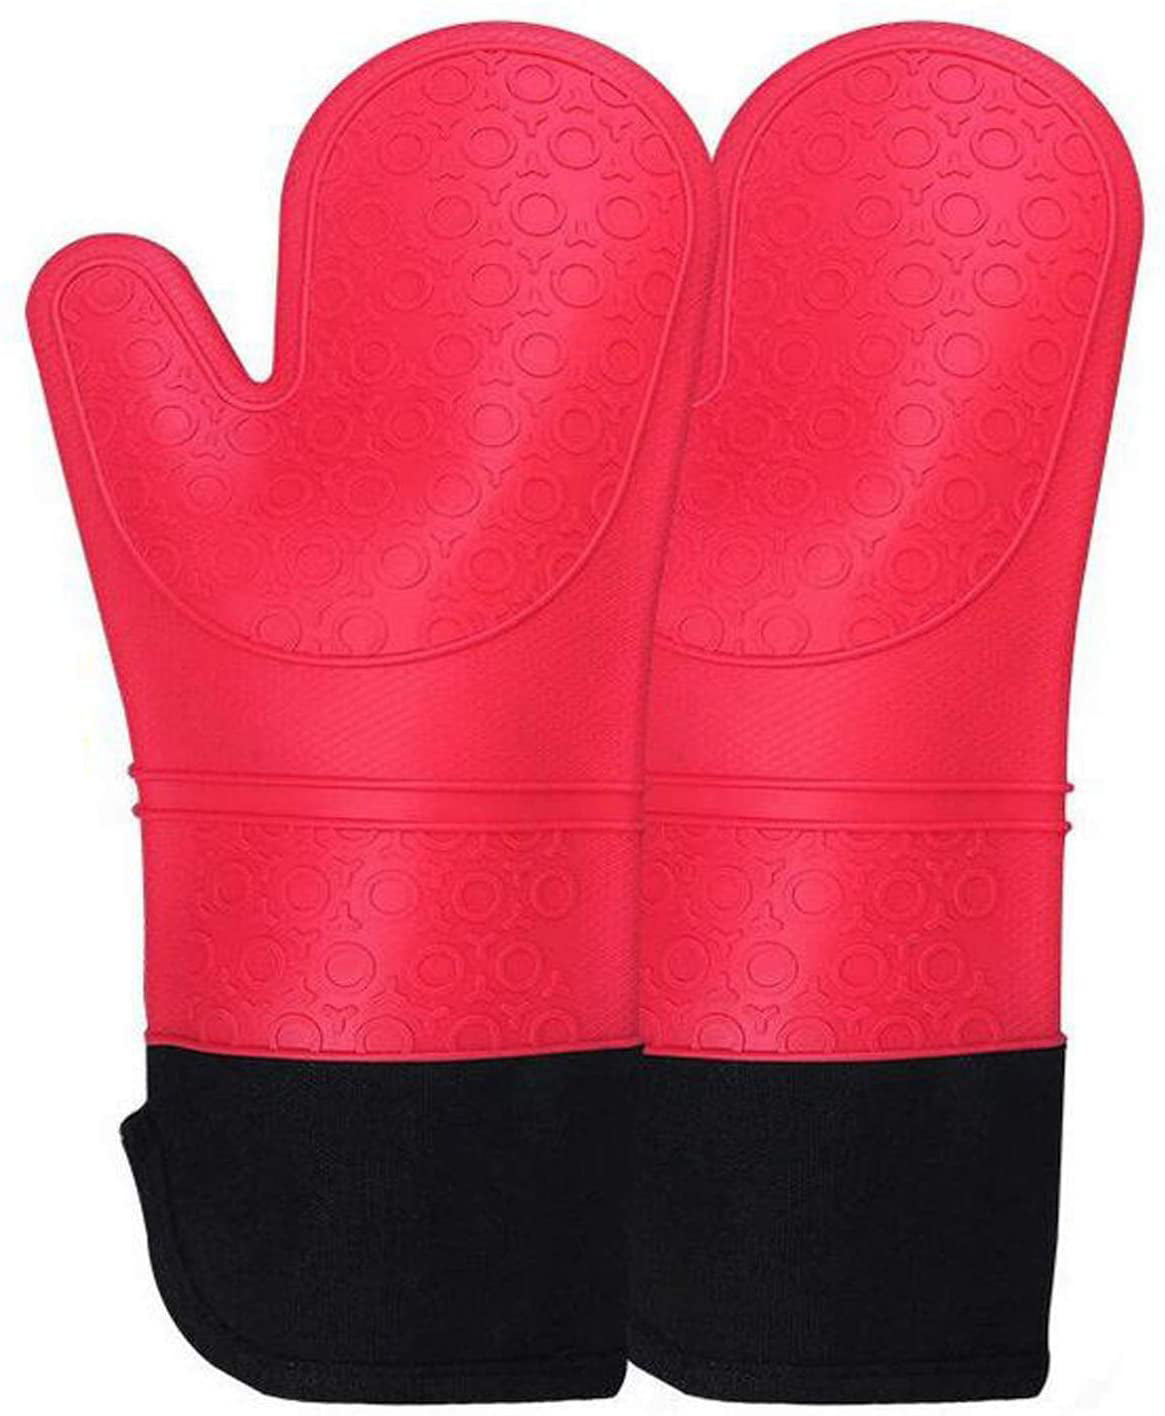 100% Cotton Single Thick Padded Oven Glove Heat Resistant Insulated Baking Mitt 